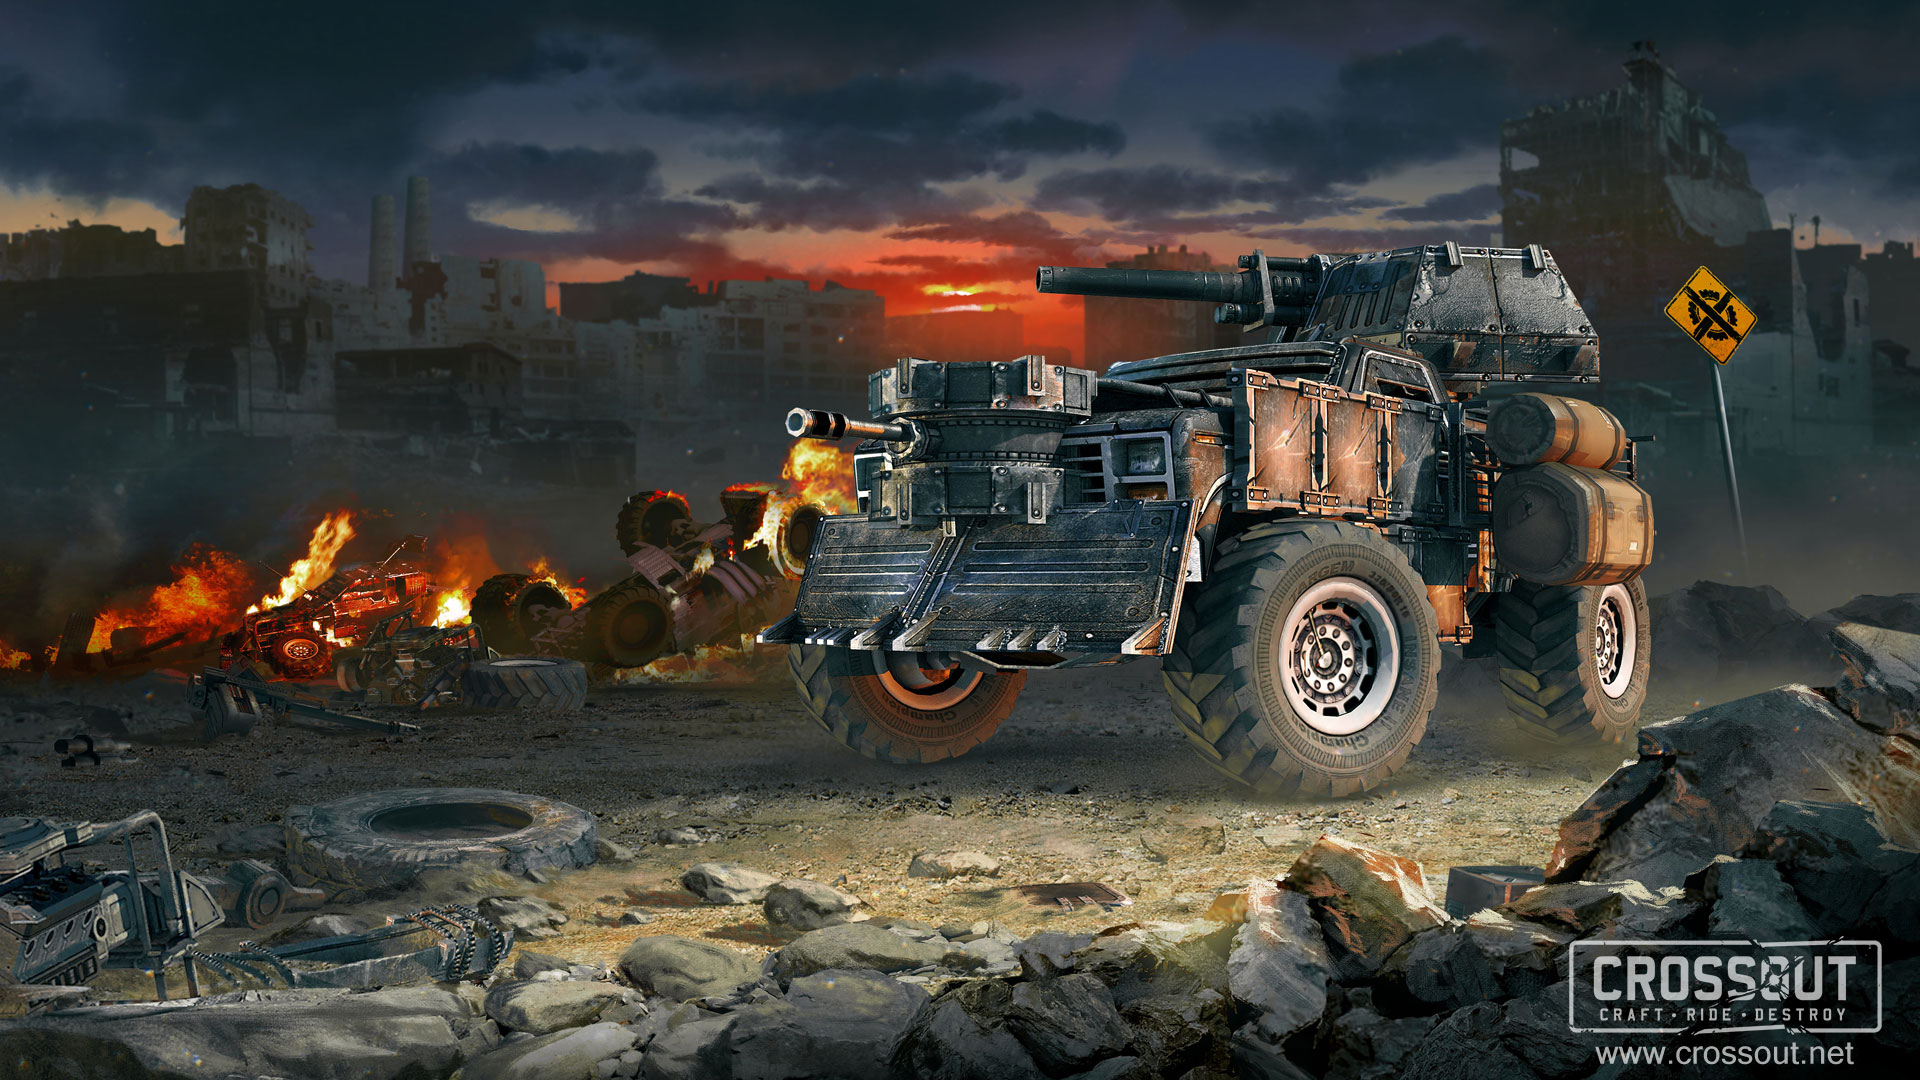 Video Game Crossout 1920x1080